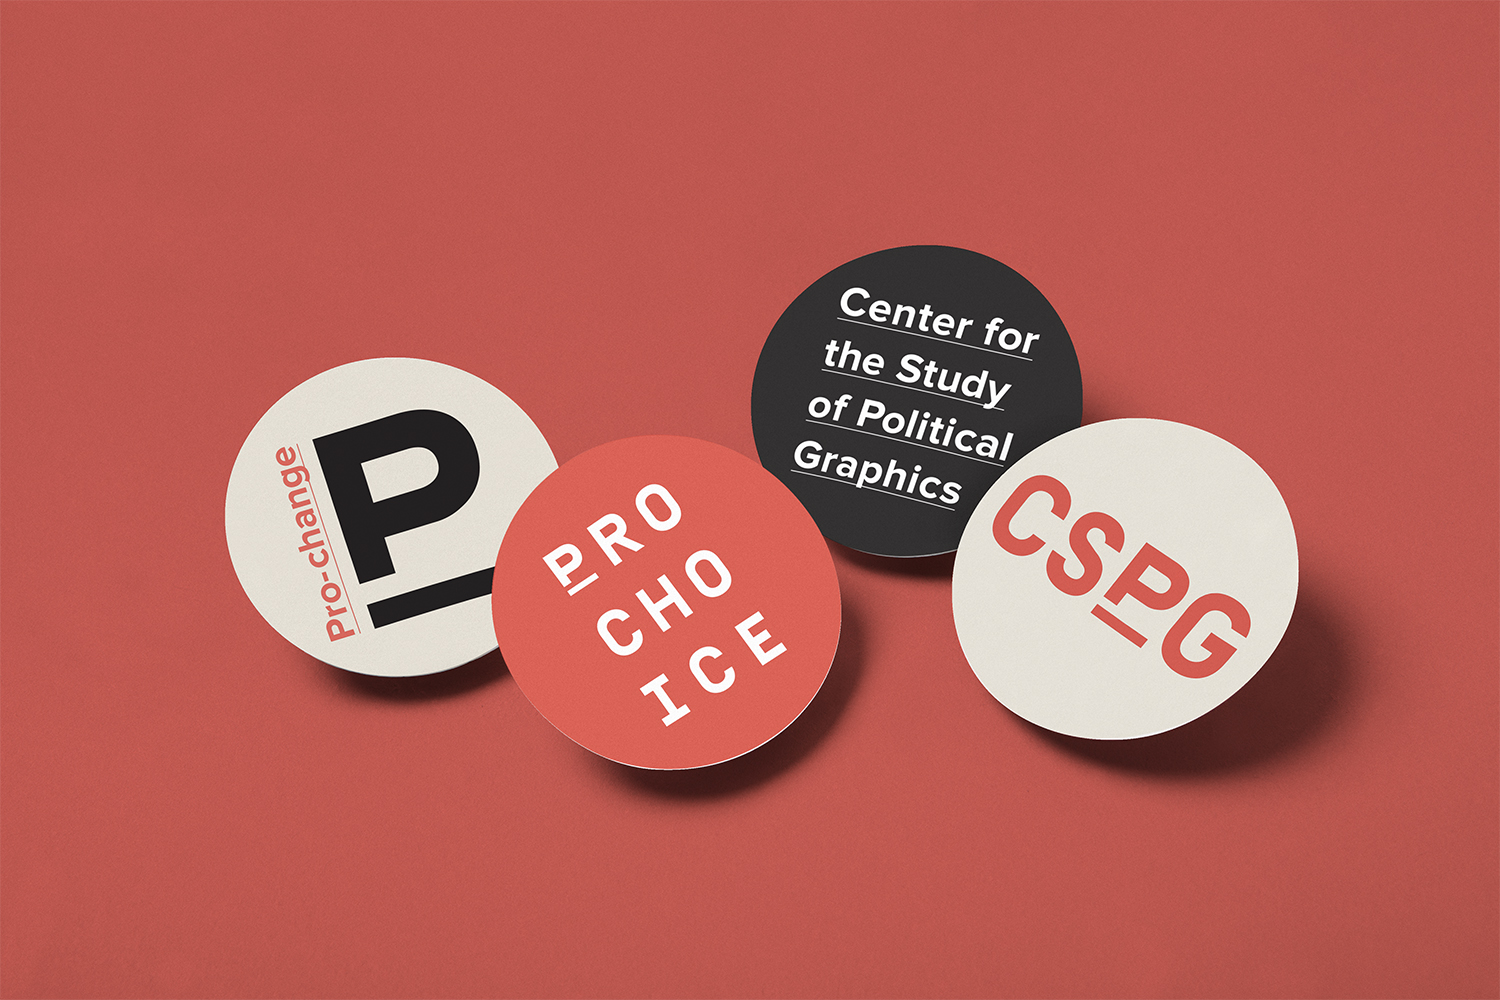 Brand identity designed by Canadian studio Blok for The Center for the Study of Political Graphics